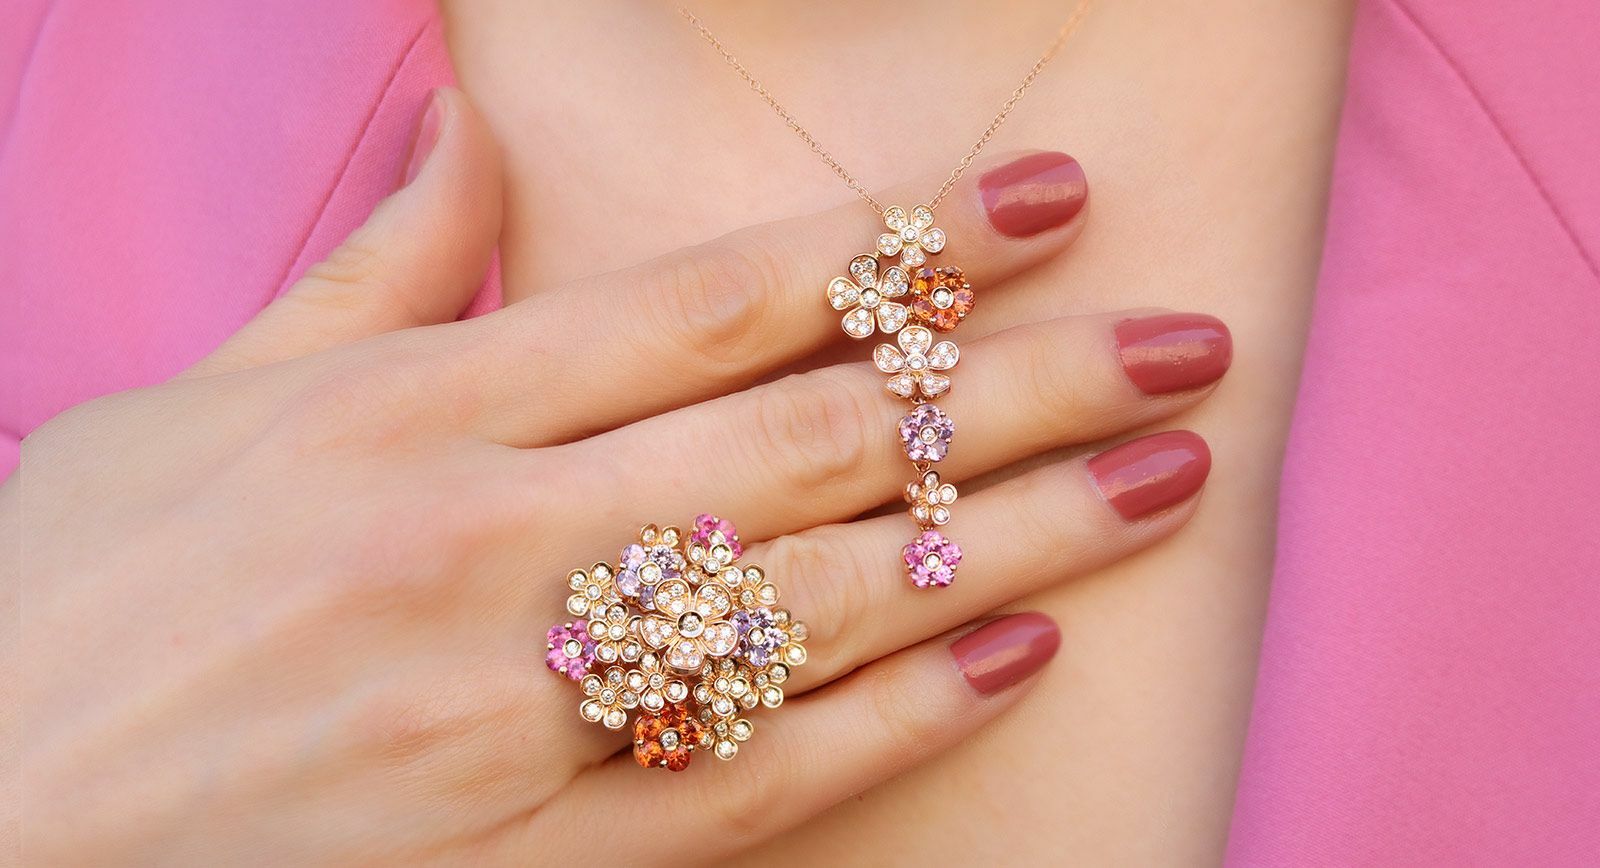 Cesare Pompanon Primavera Multi Flower ring and necklace with sapphires and diamonds in rose gold 